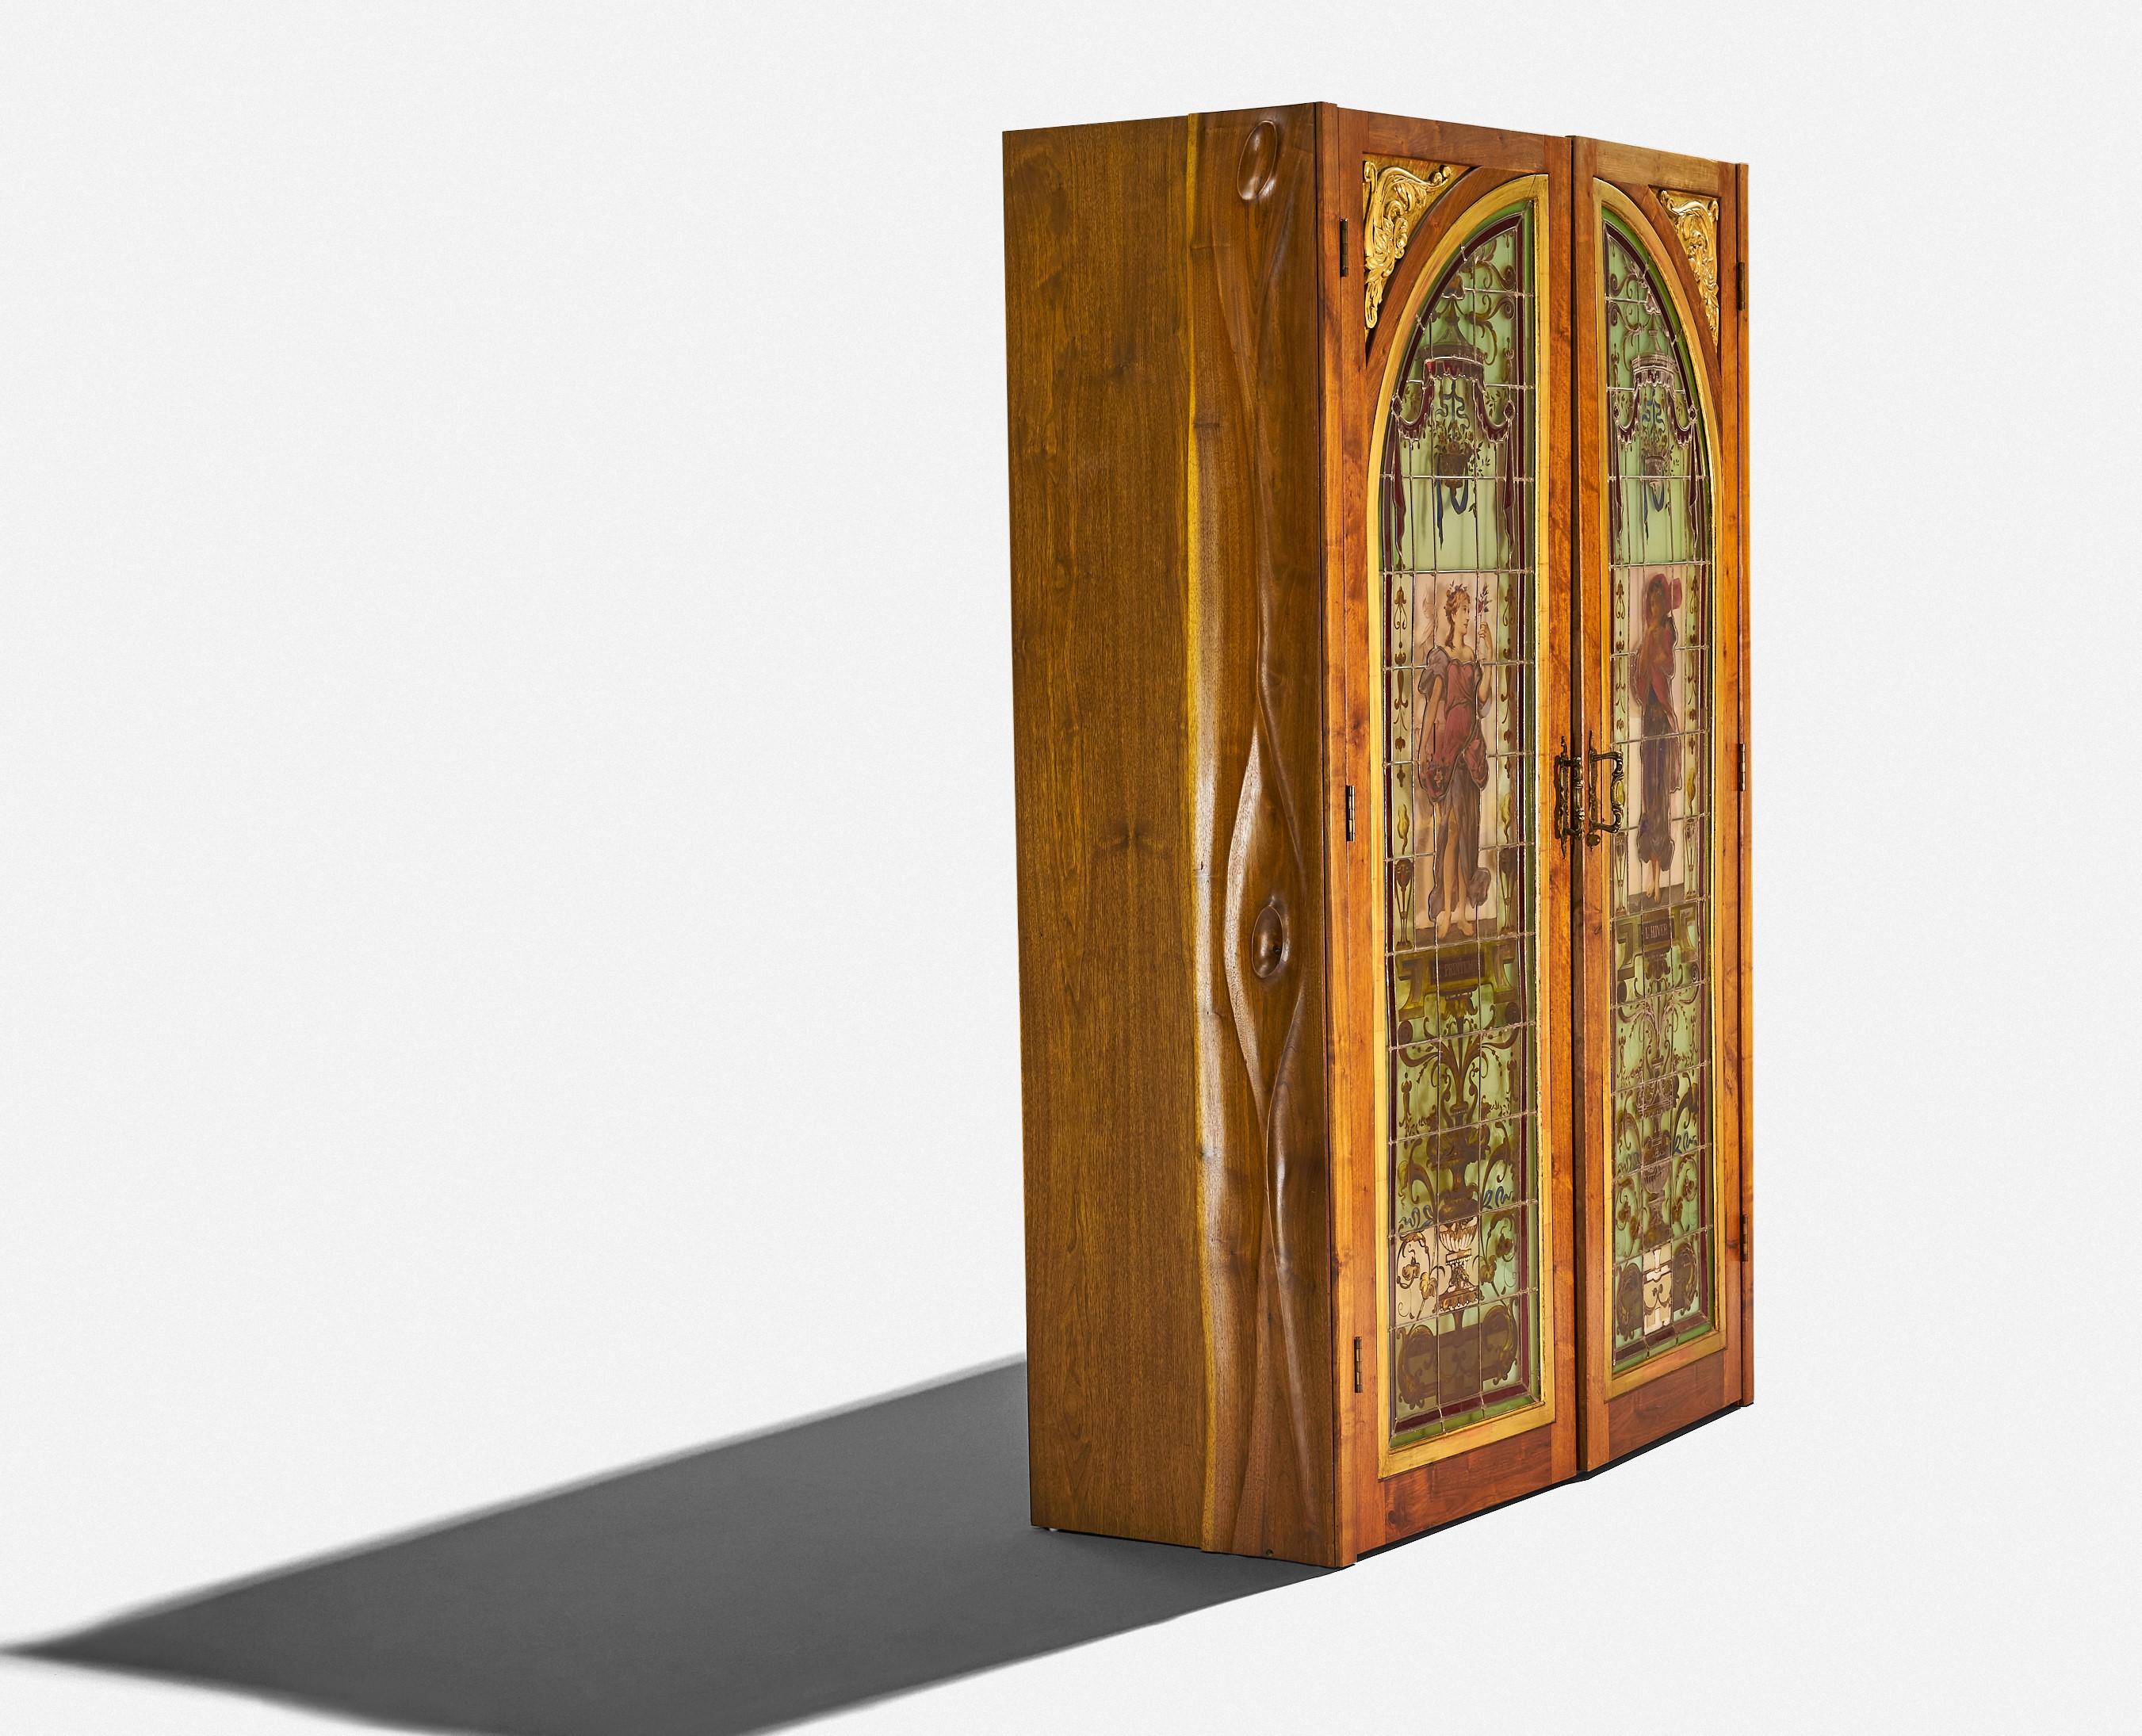 Phillip Lloyd Powell
illuminated bar cabinet
USA, 1970s
hand-carved walnut, glass, brass, found objects

One of one bench-made Phil Powell bar cabinet. Side panels are hand-carved walnut. Doors are stained glass with backlit lighting to